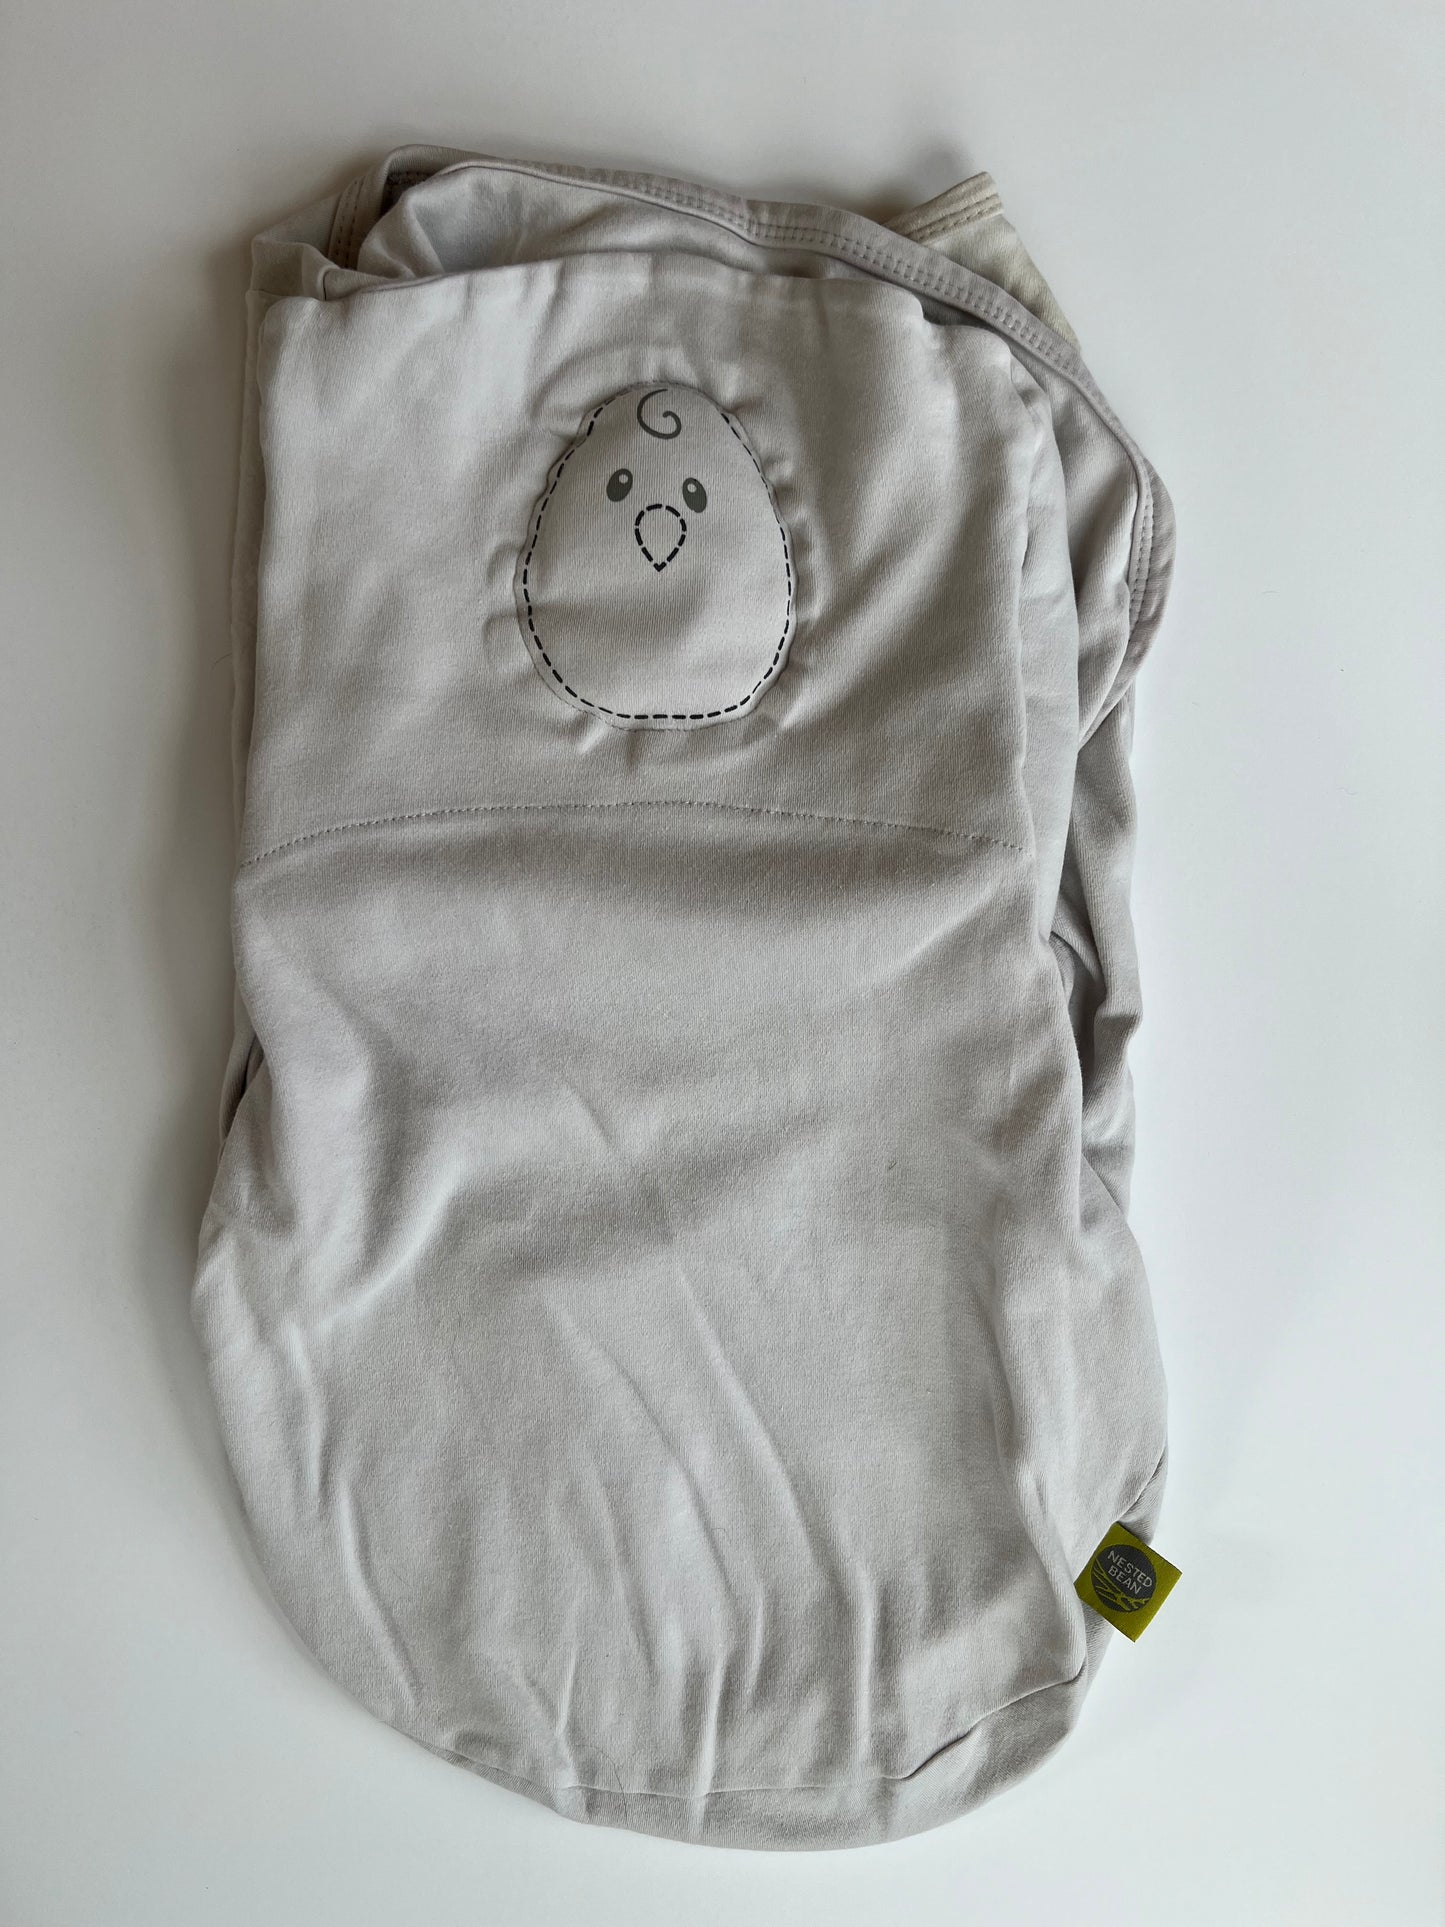 Nested Bean Swaddle Size Small